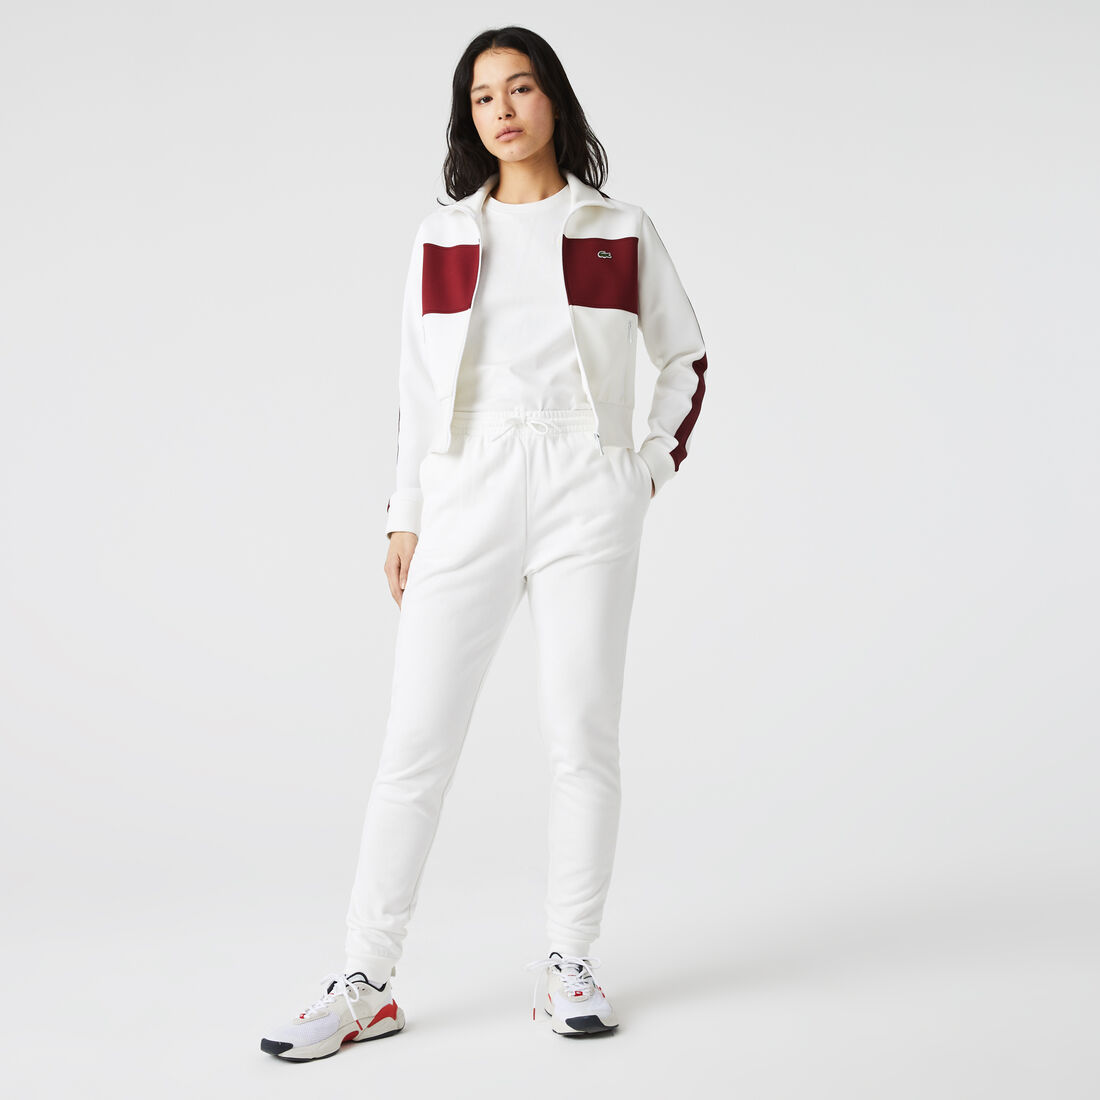 Lacoste Pants Clearance - USA Online Lacoste